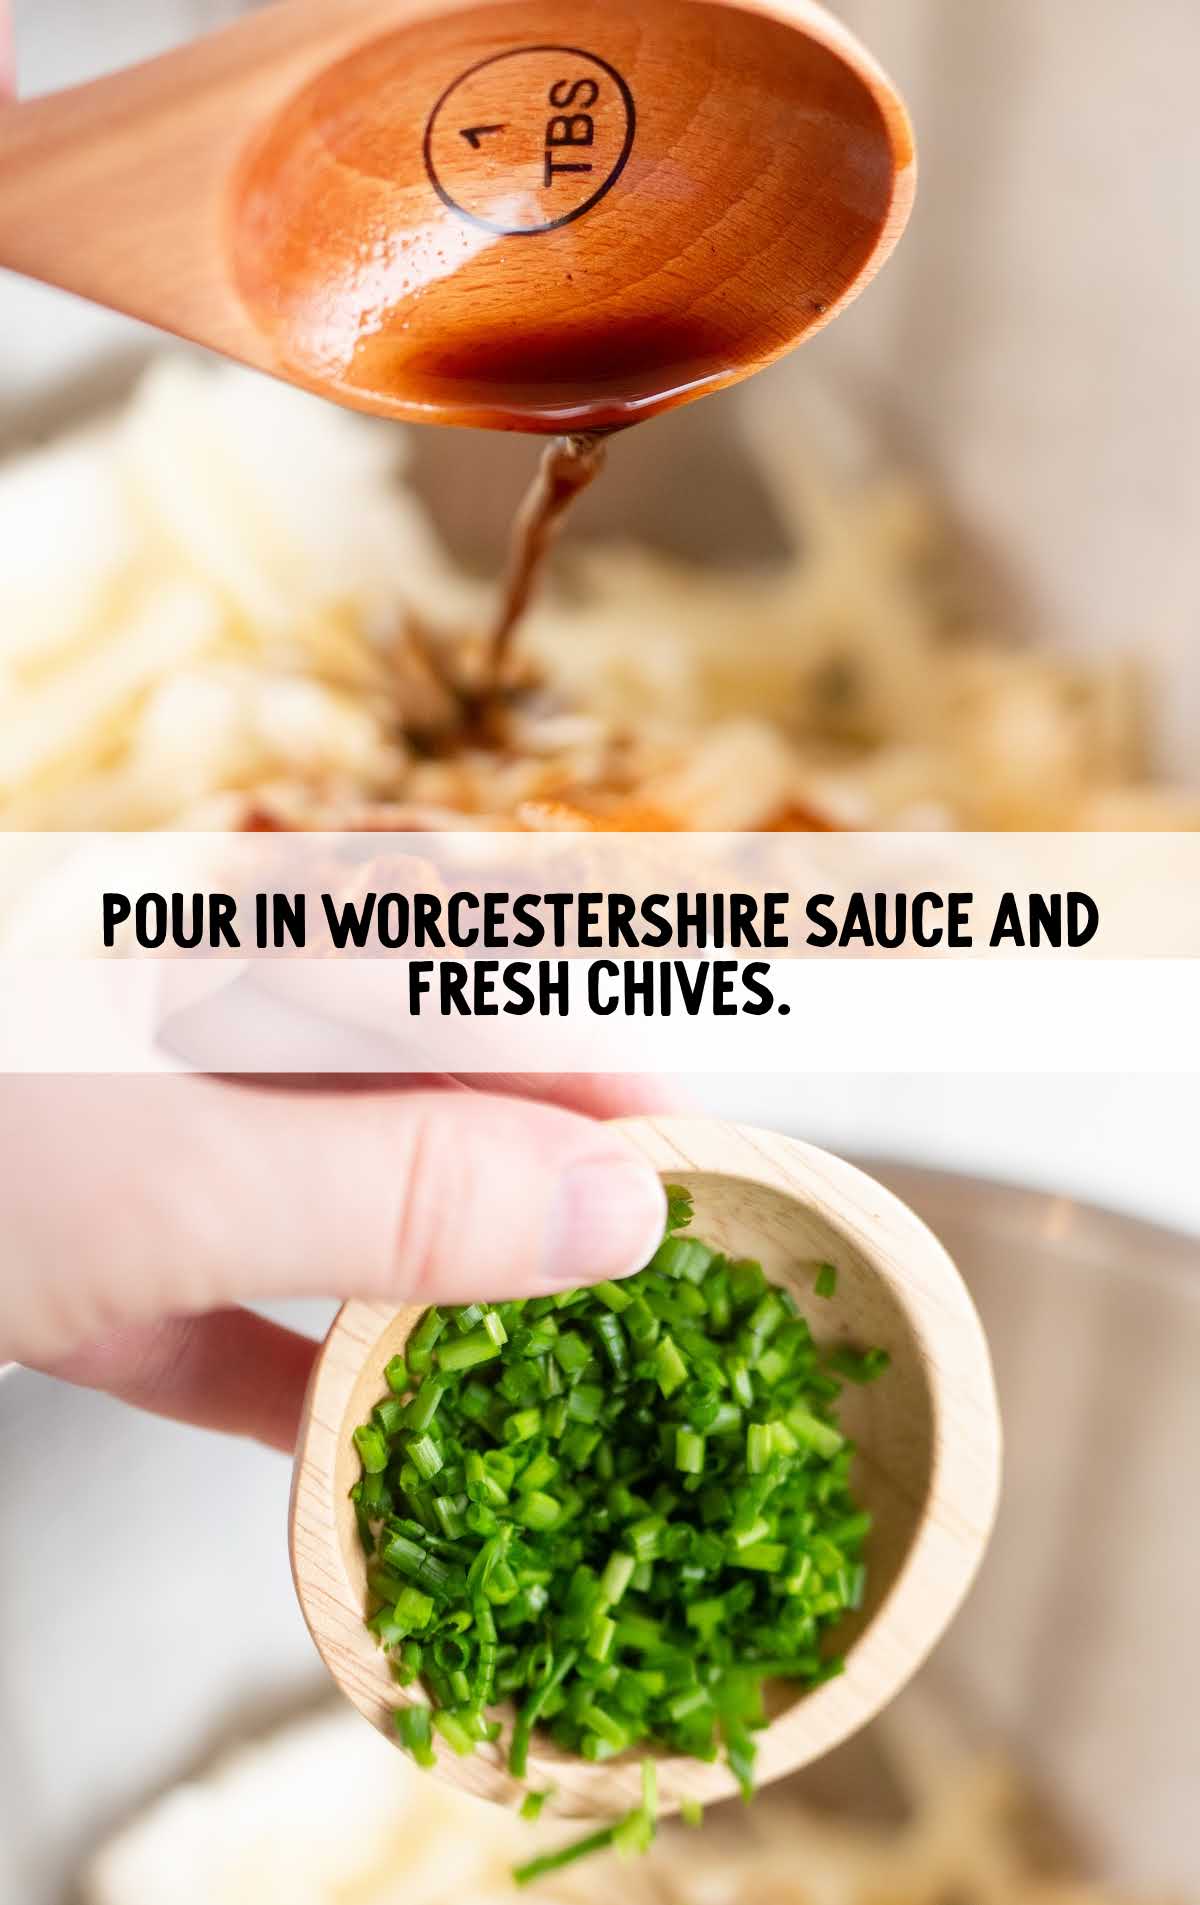 Worcestershire sauce and chives added to the bowl of dip ingredients 